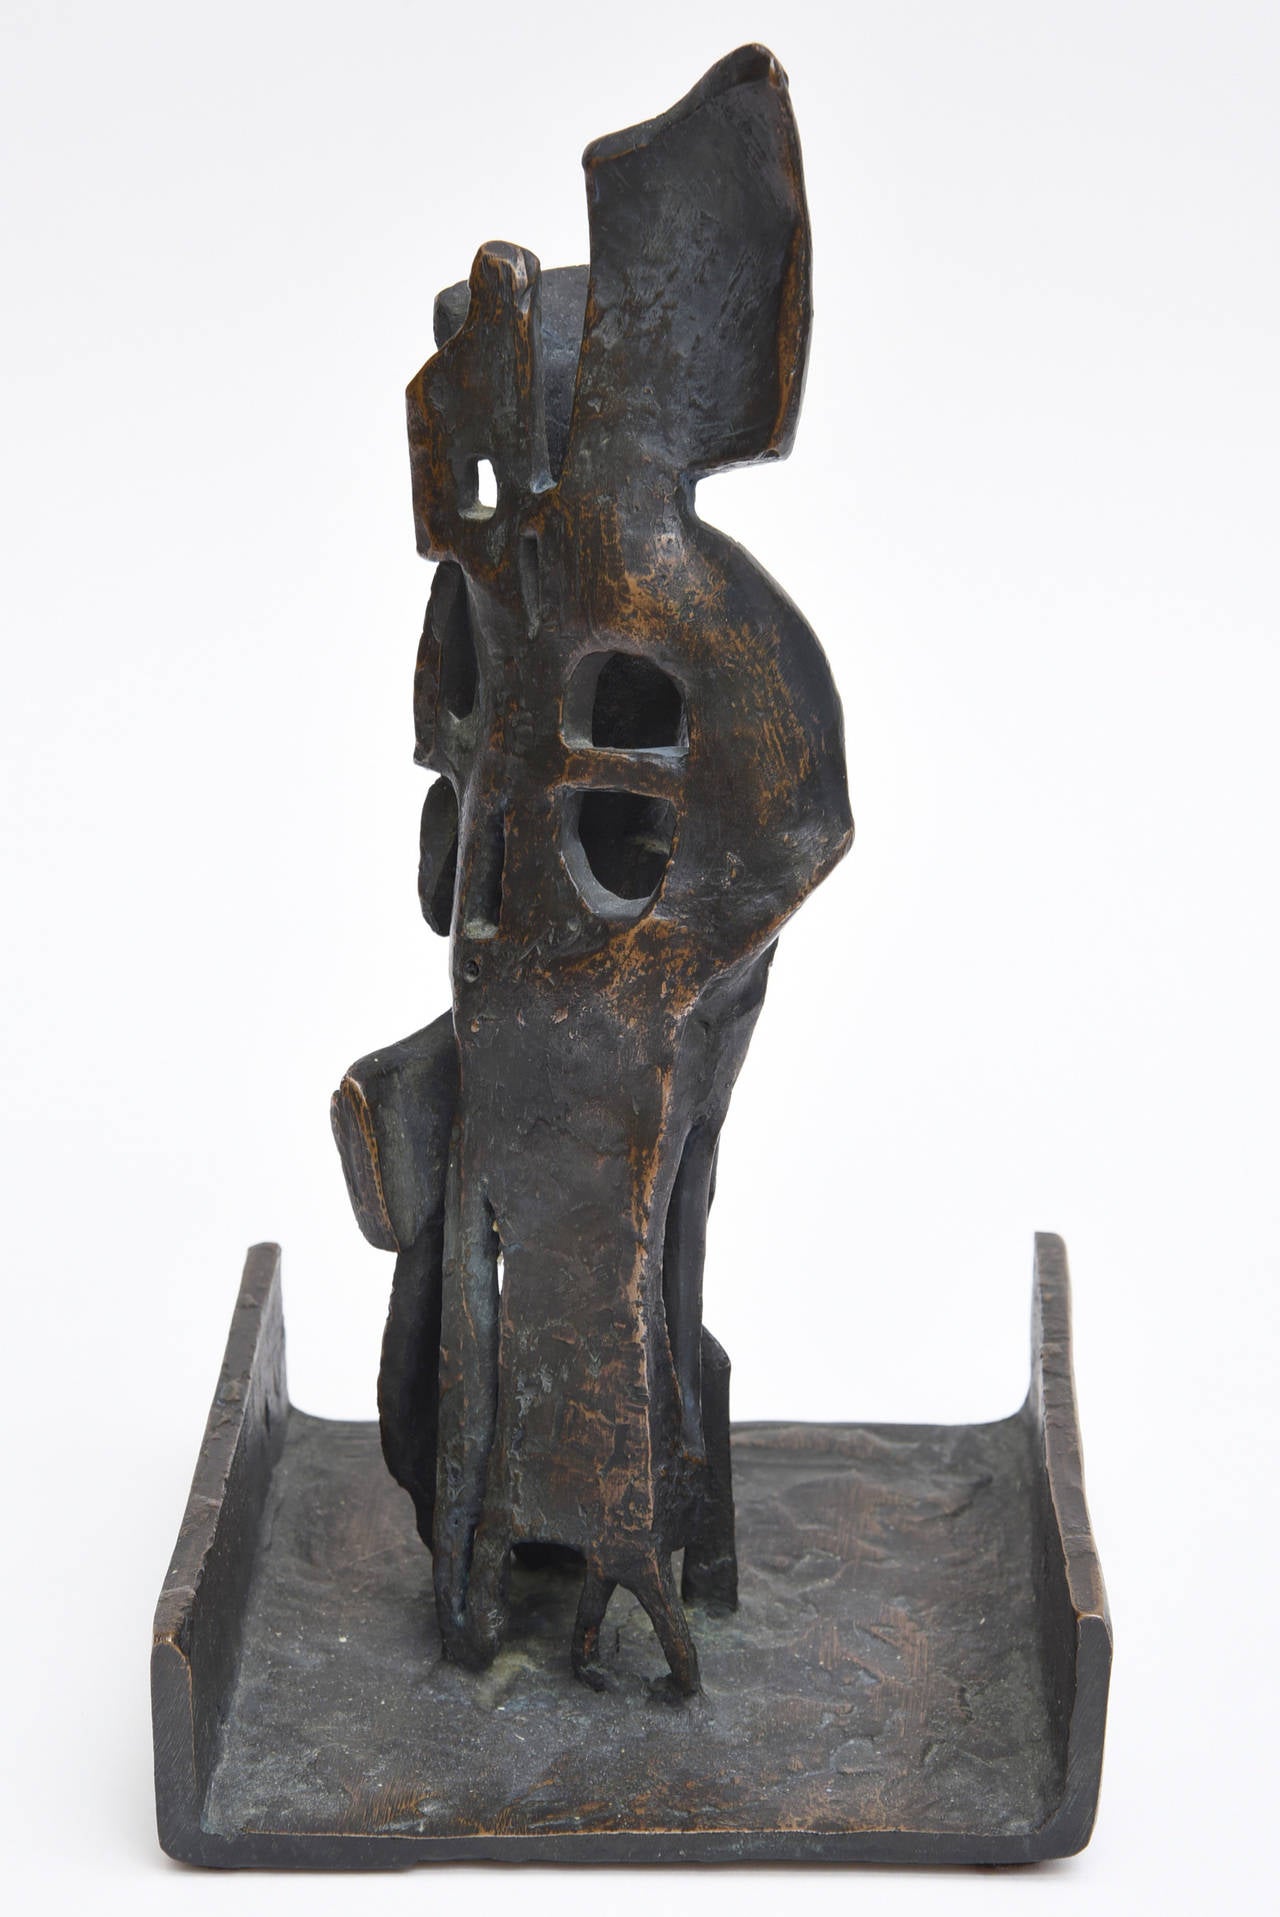 This heavy bronze abstract Mid-Century Modern sculpture entitled 